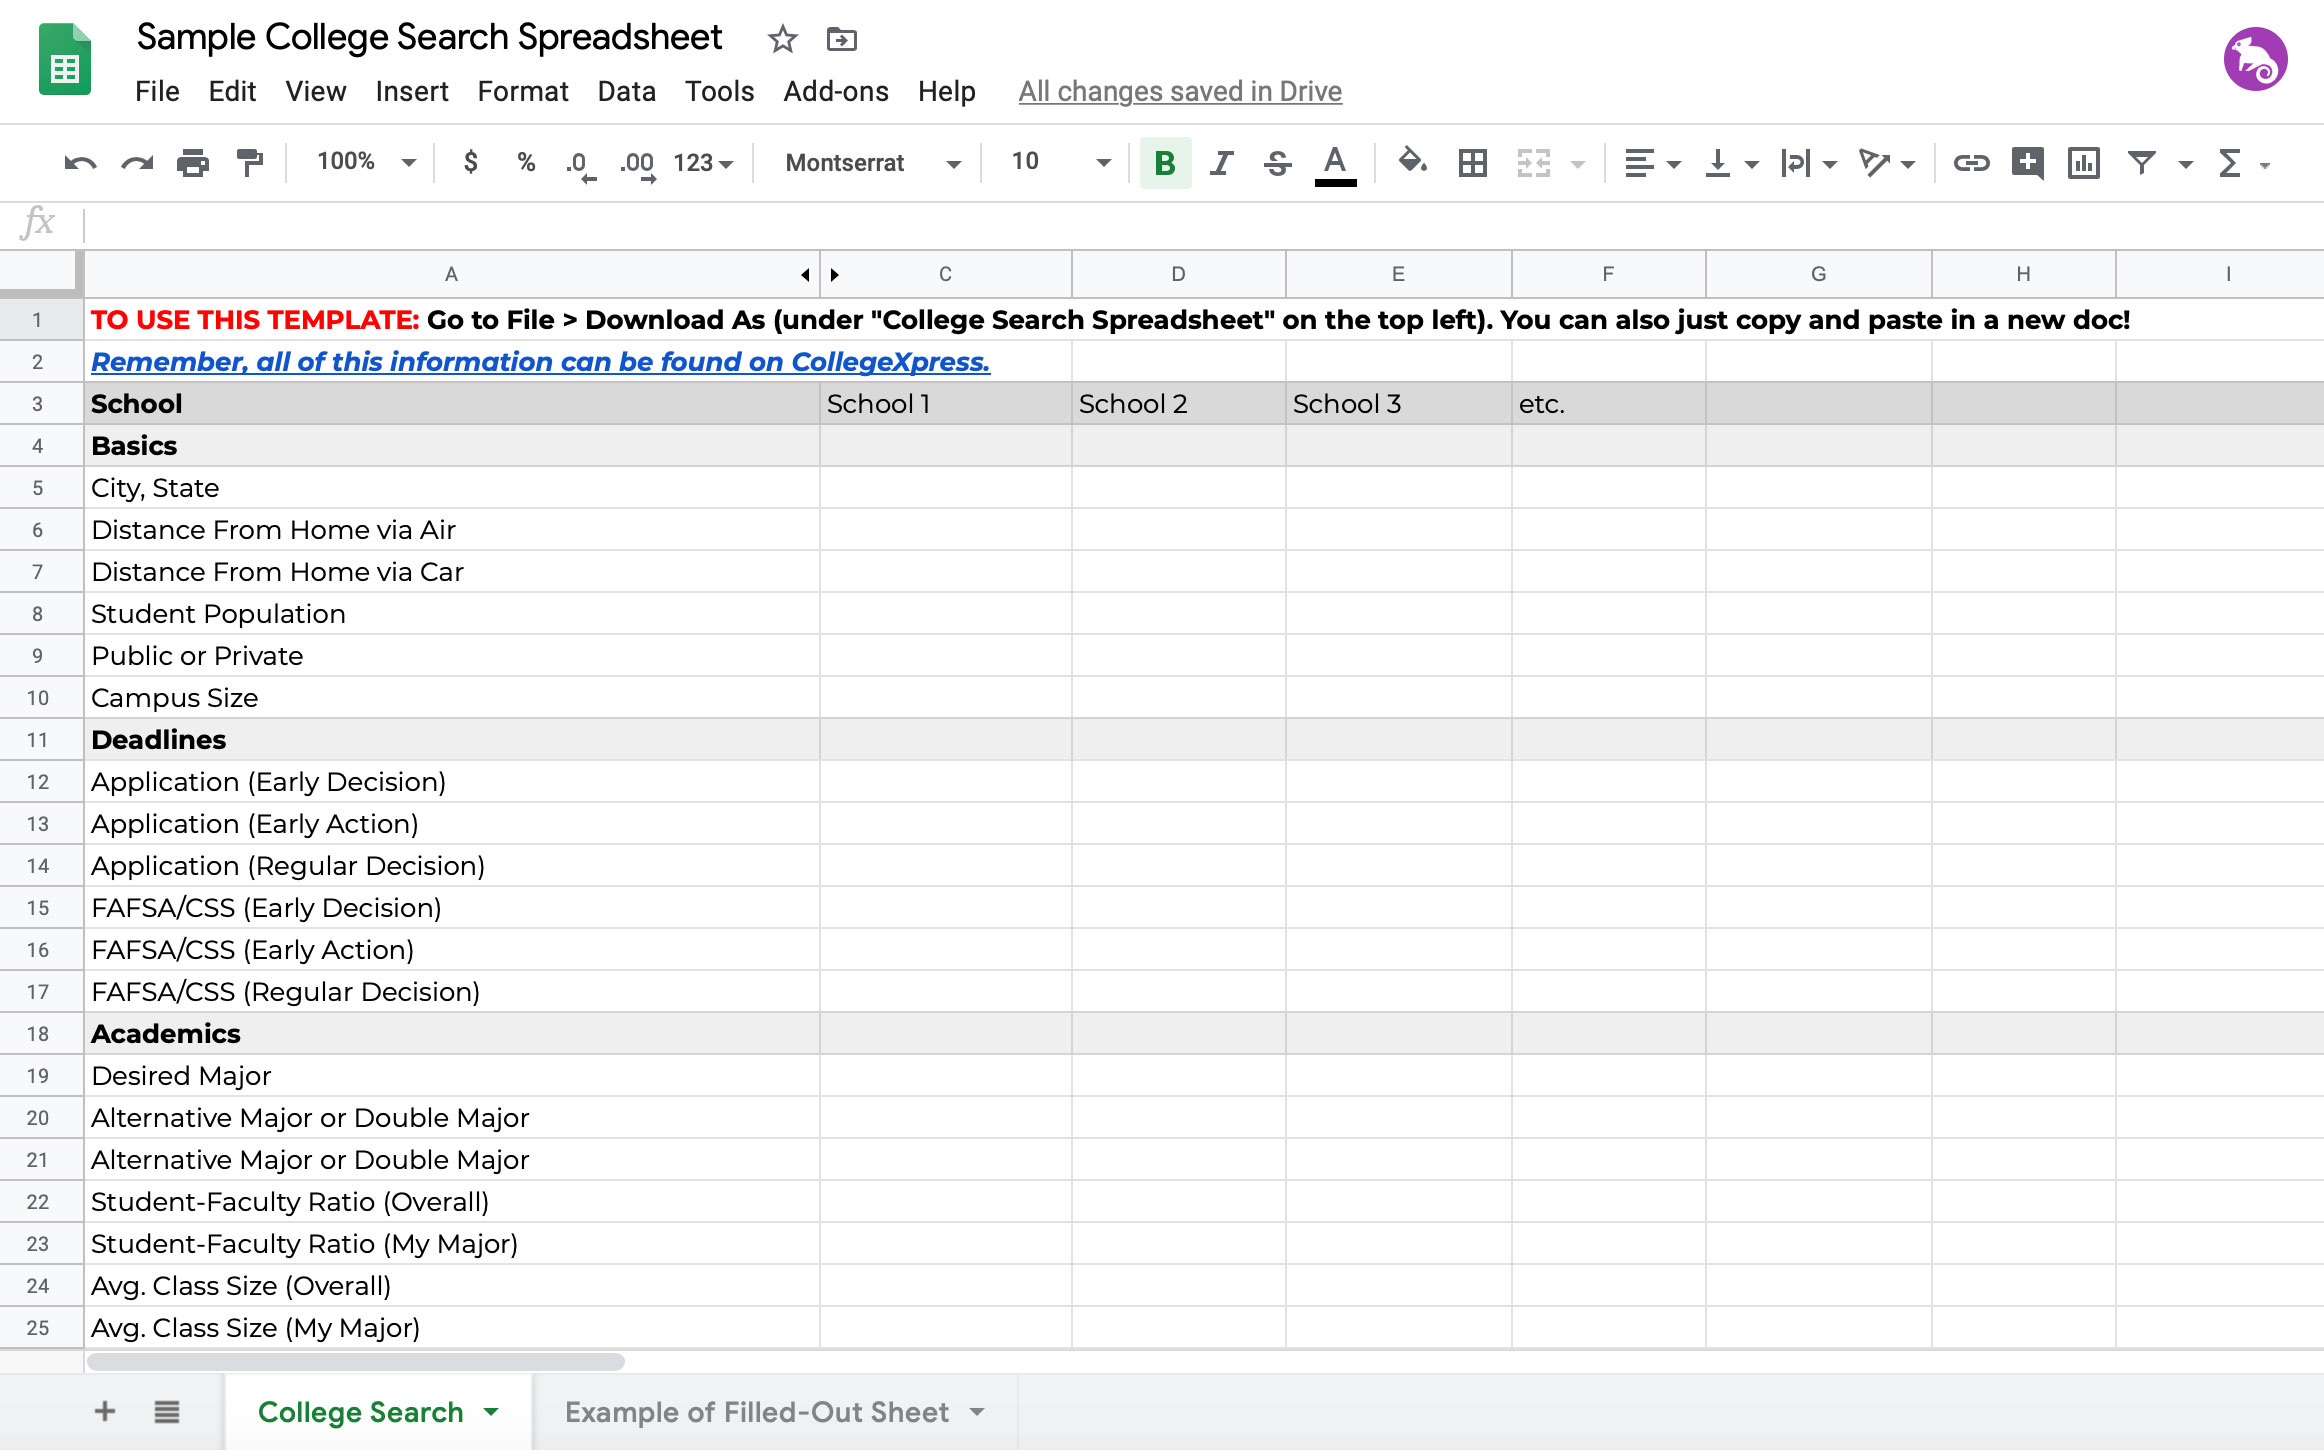 College Search Spreadsheet Template from images.collegexpress.com